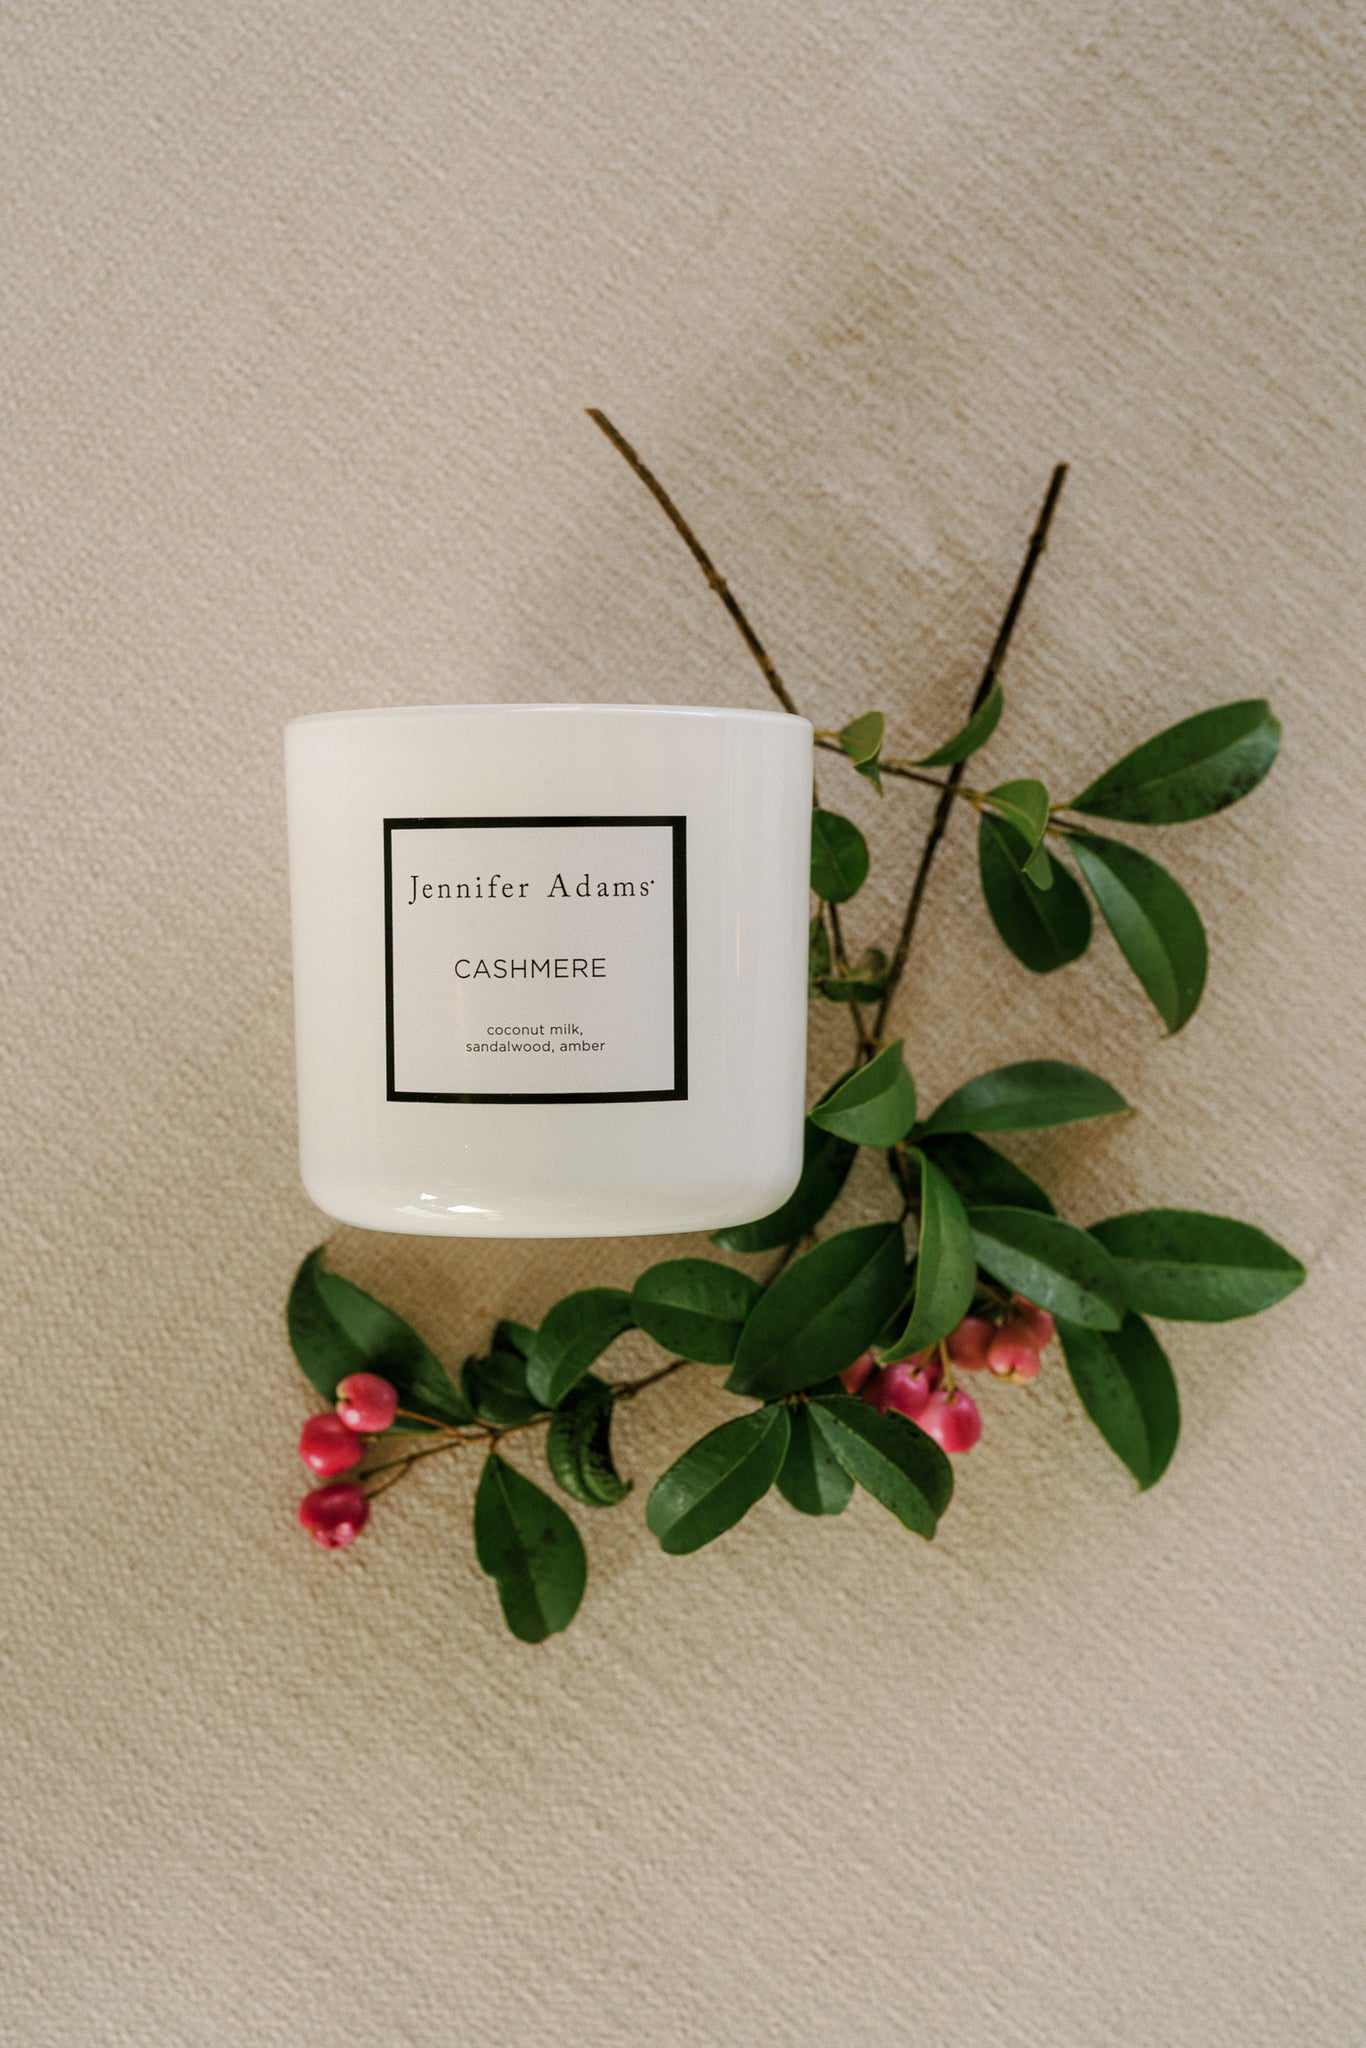 Create a scent experience throughout your home